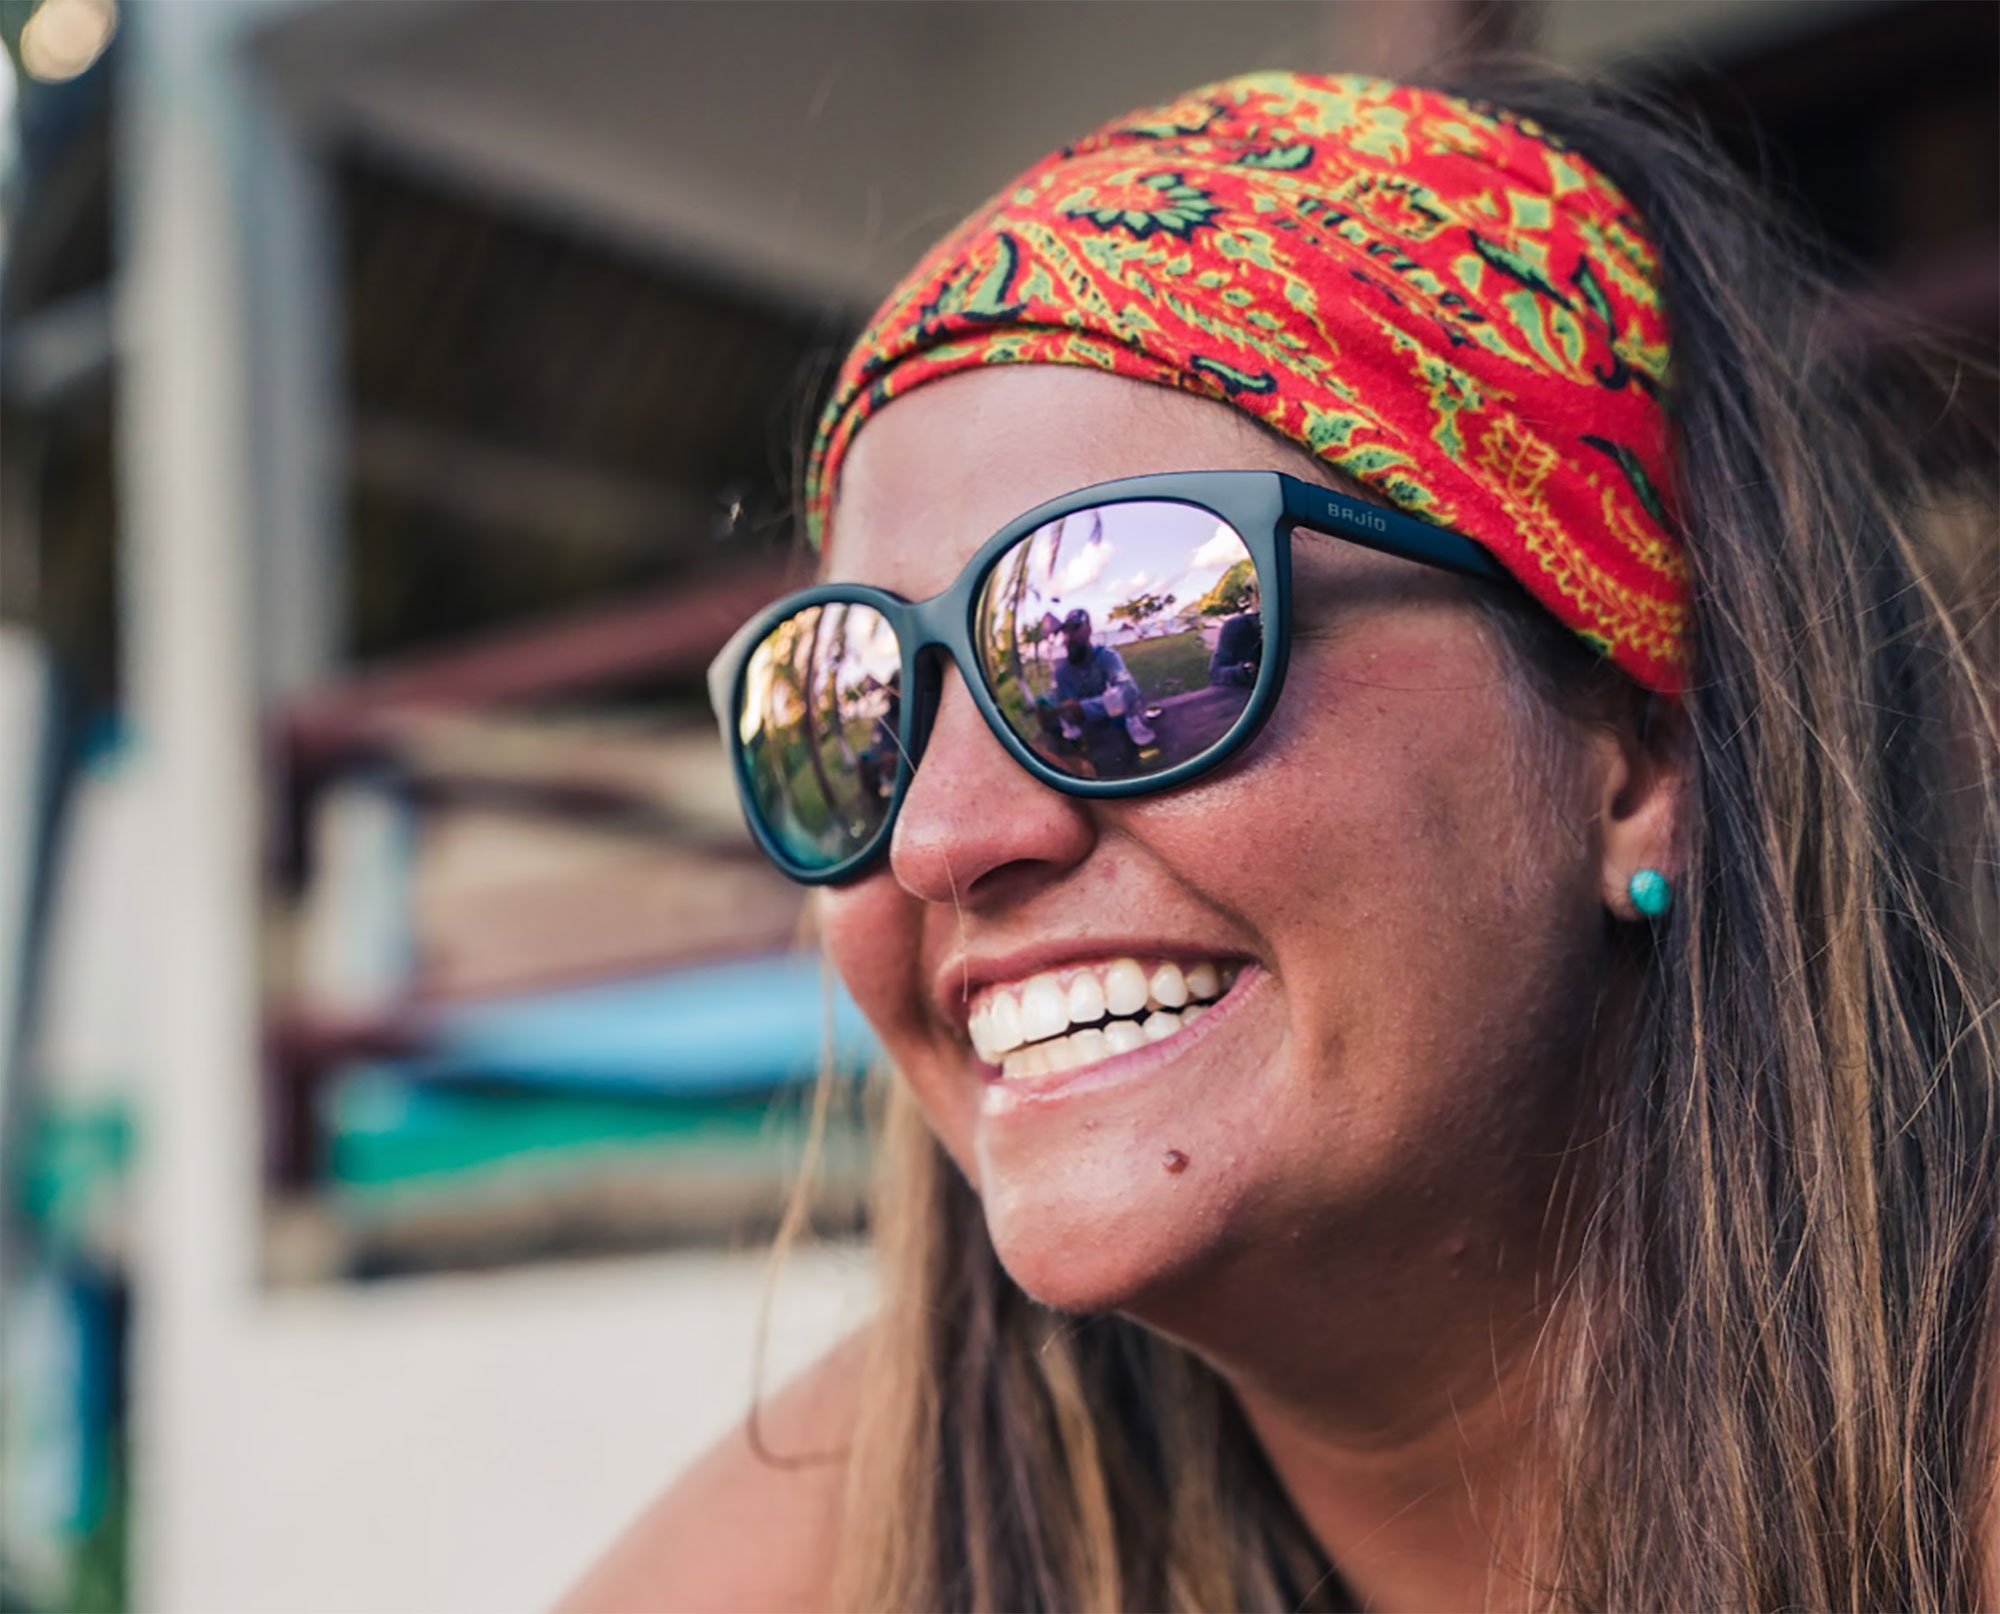 Unpacked: Bajio Sunglasses May Be The Clearest On Earth